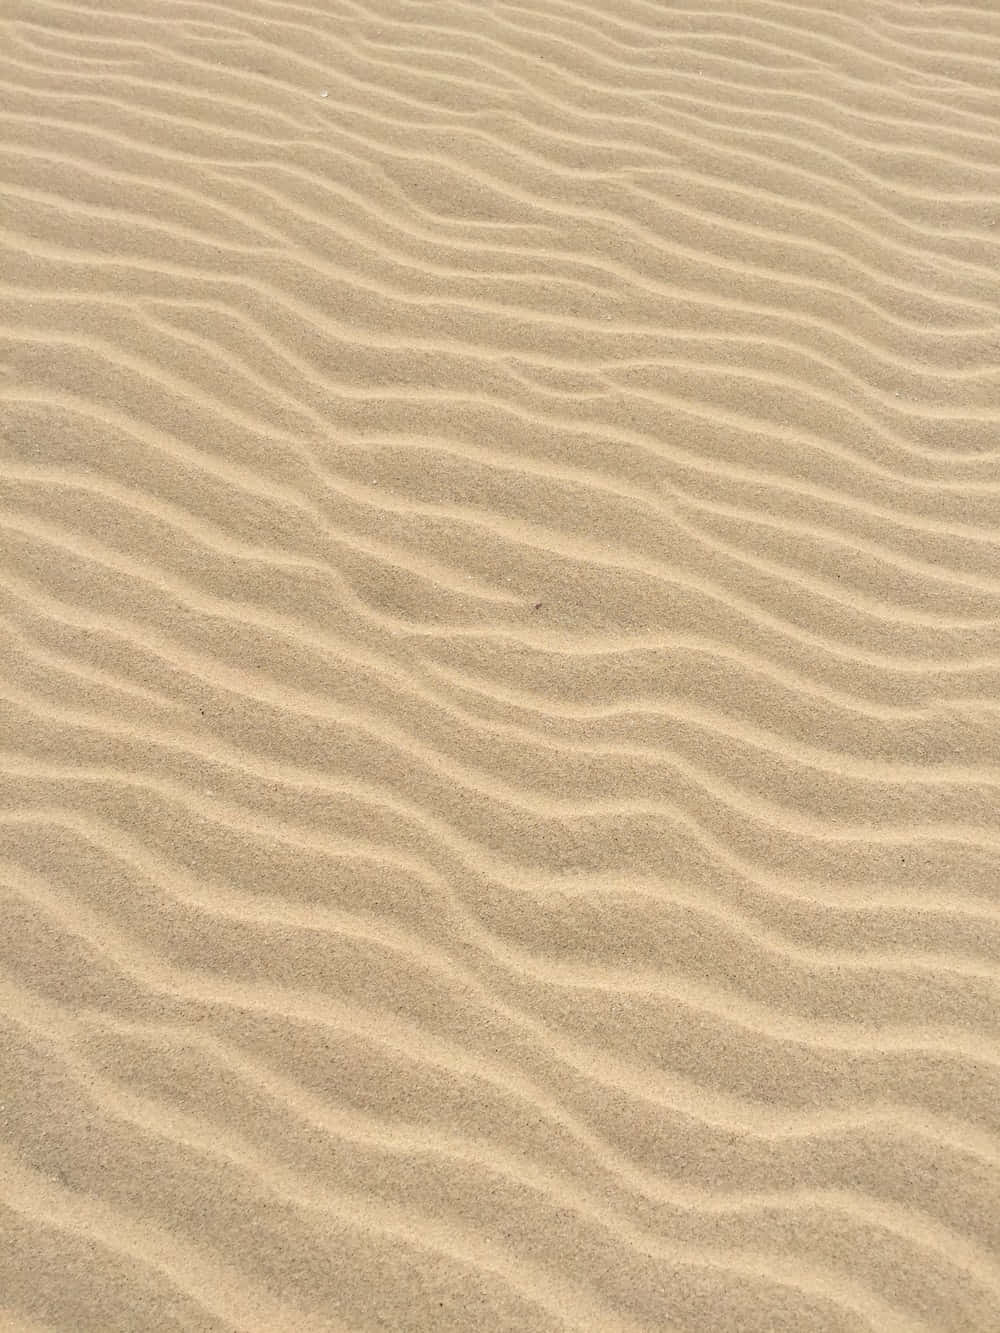 Beach Sand Wave Texture Picture